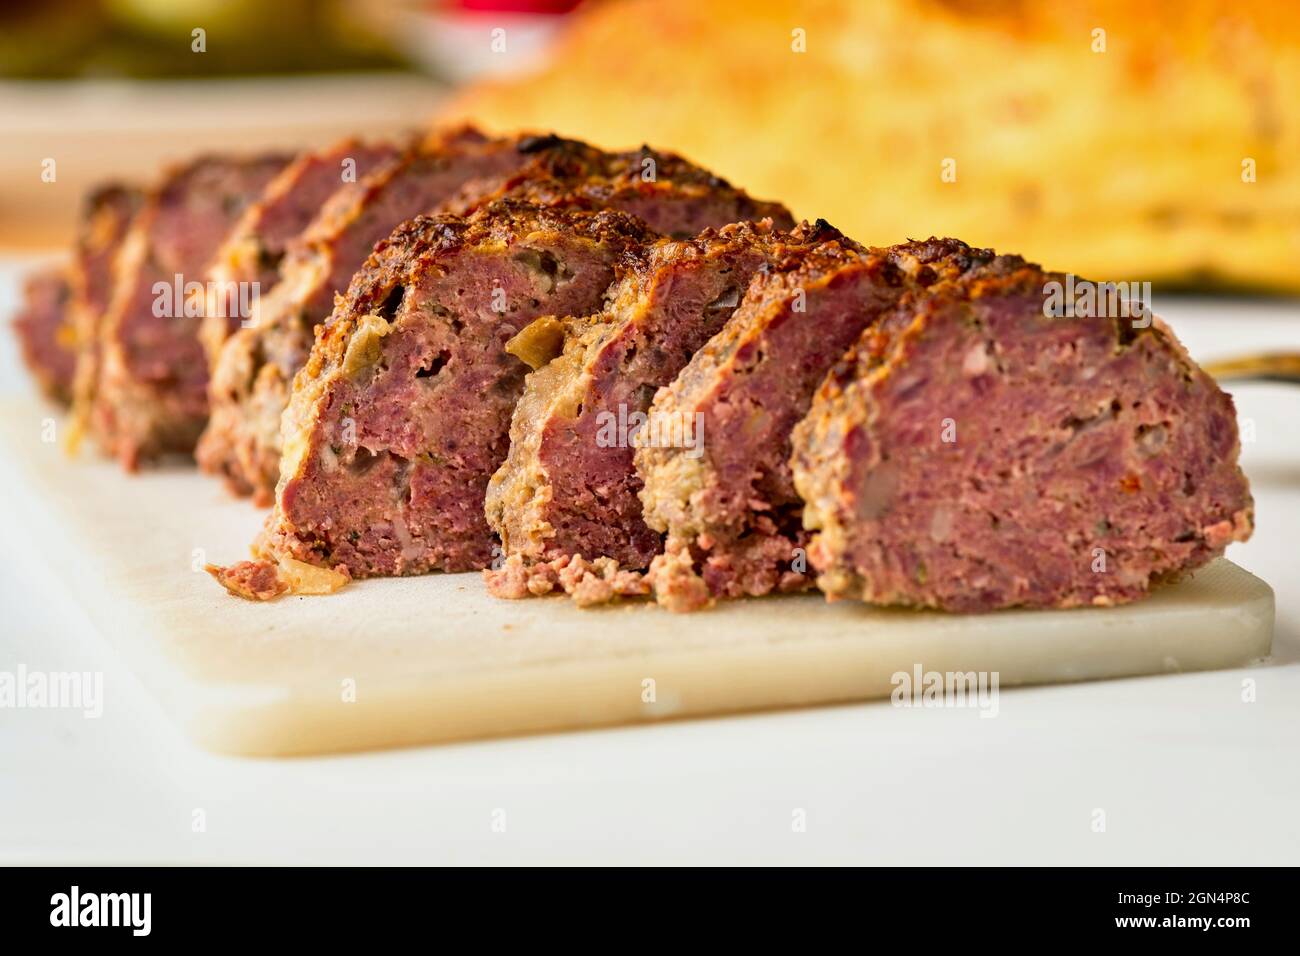 Baked sliced meatlof on kitchen board, blurred bread on background. Stock Photo